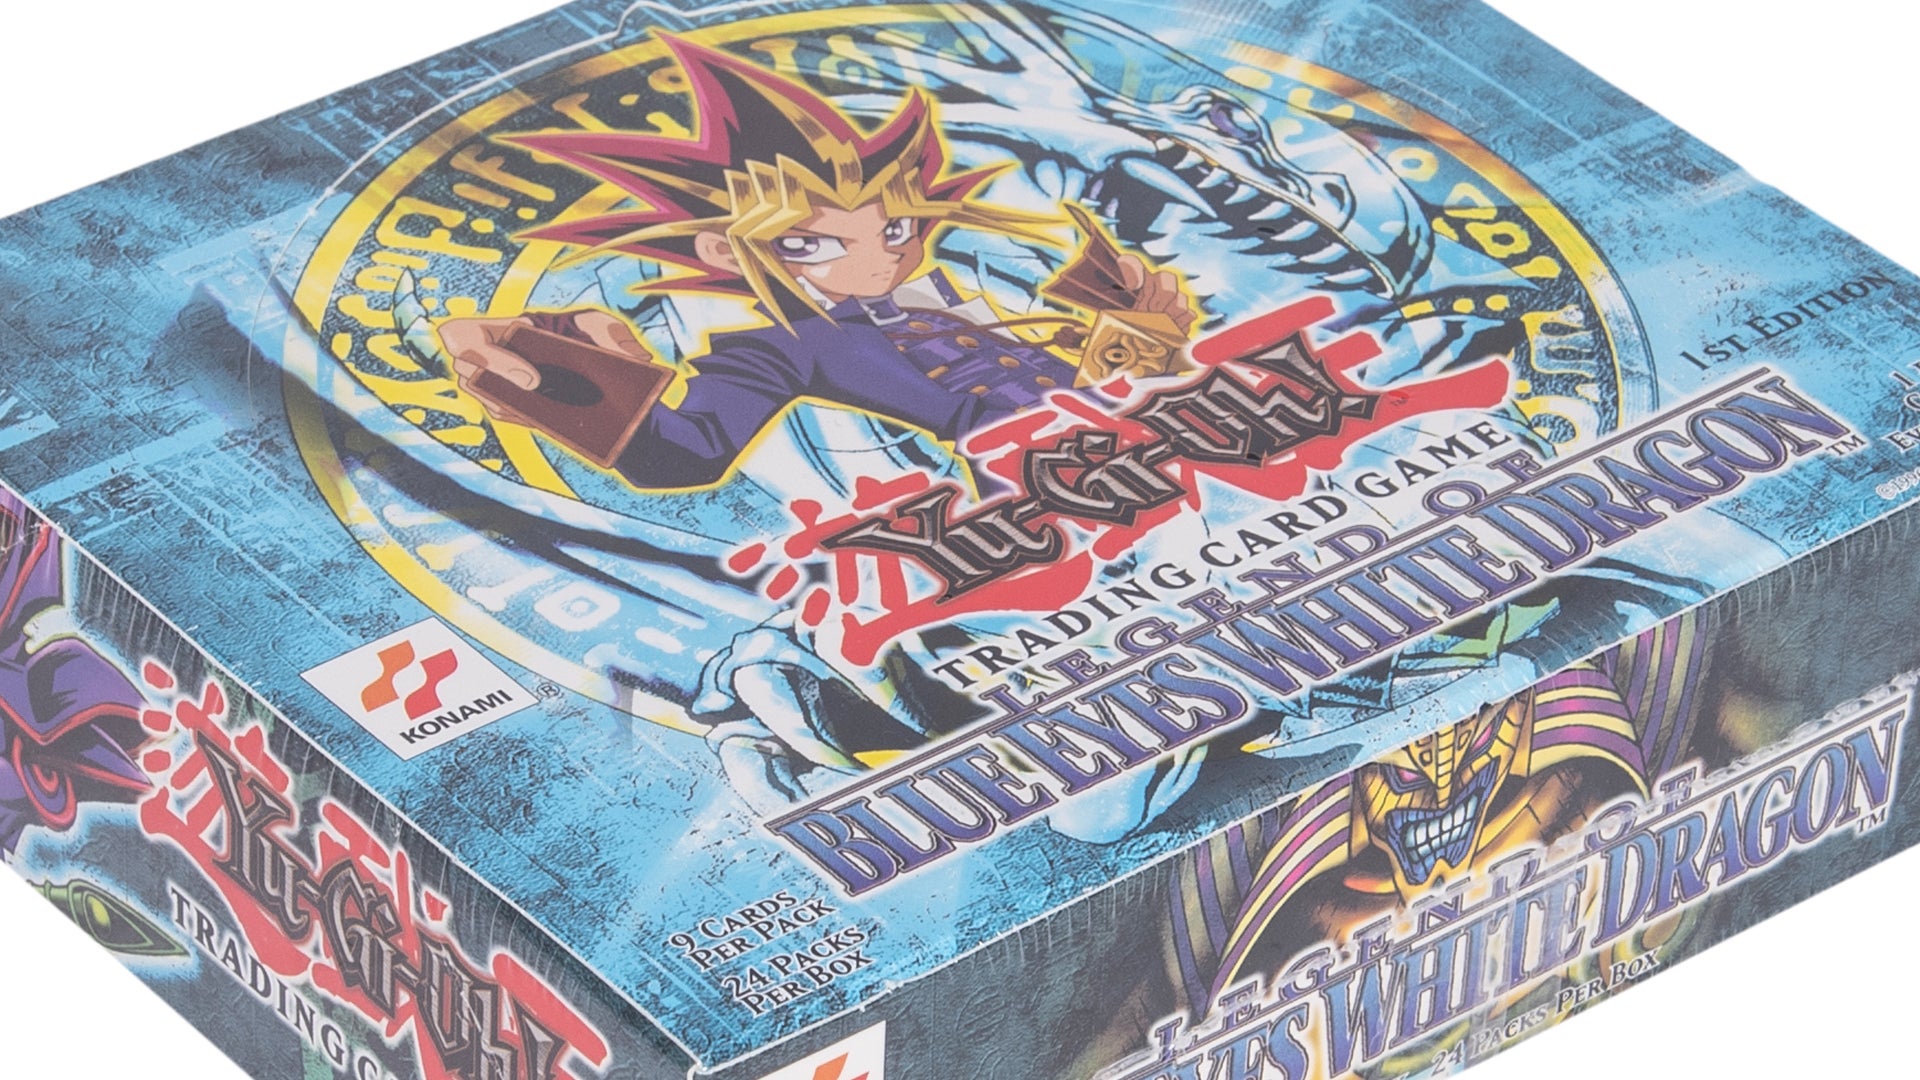 Yu-Gi-Oh! TCG booster case sells for record $584,000 | Dicebreaker